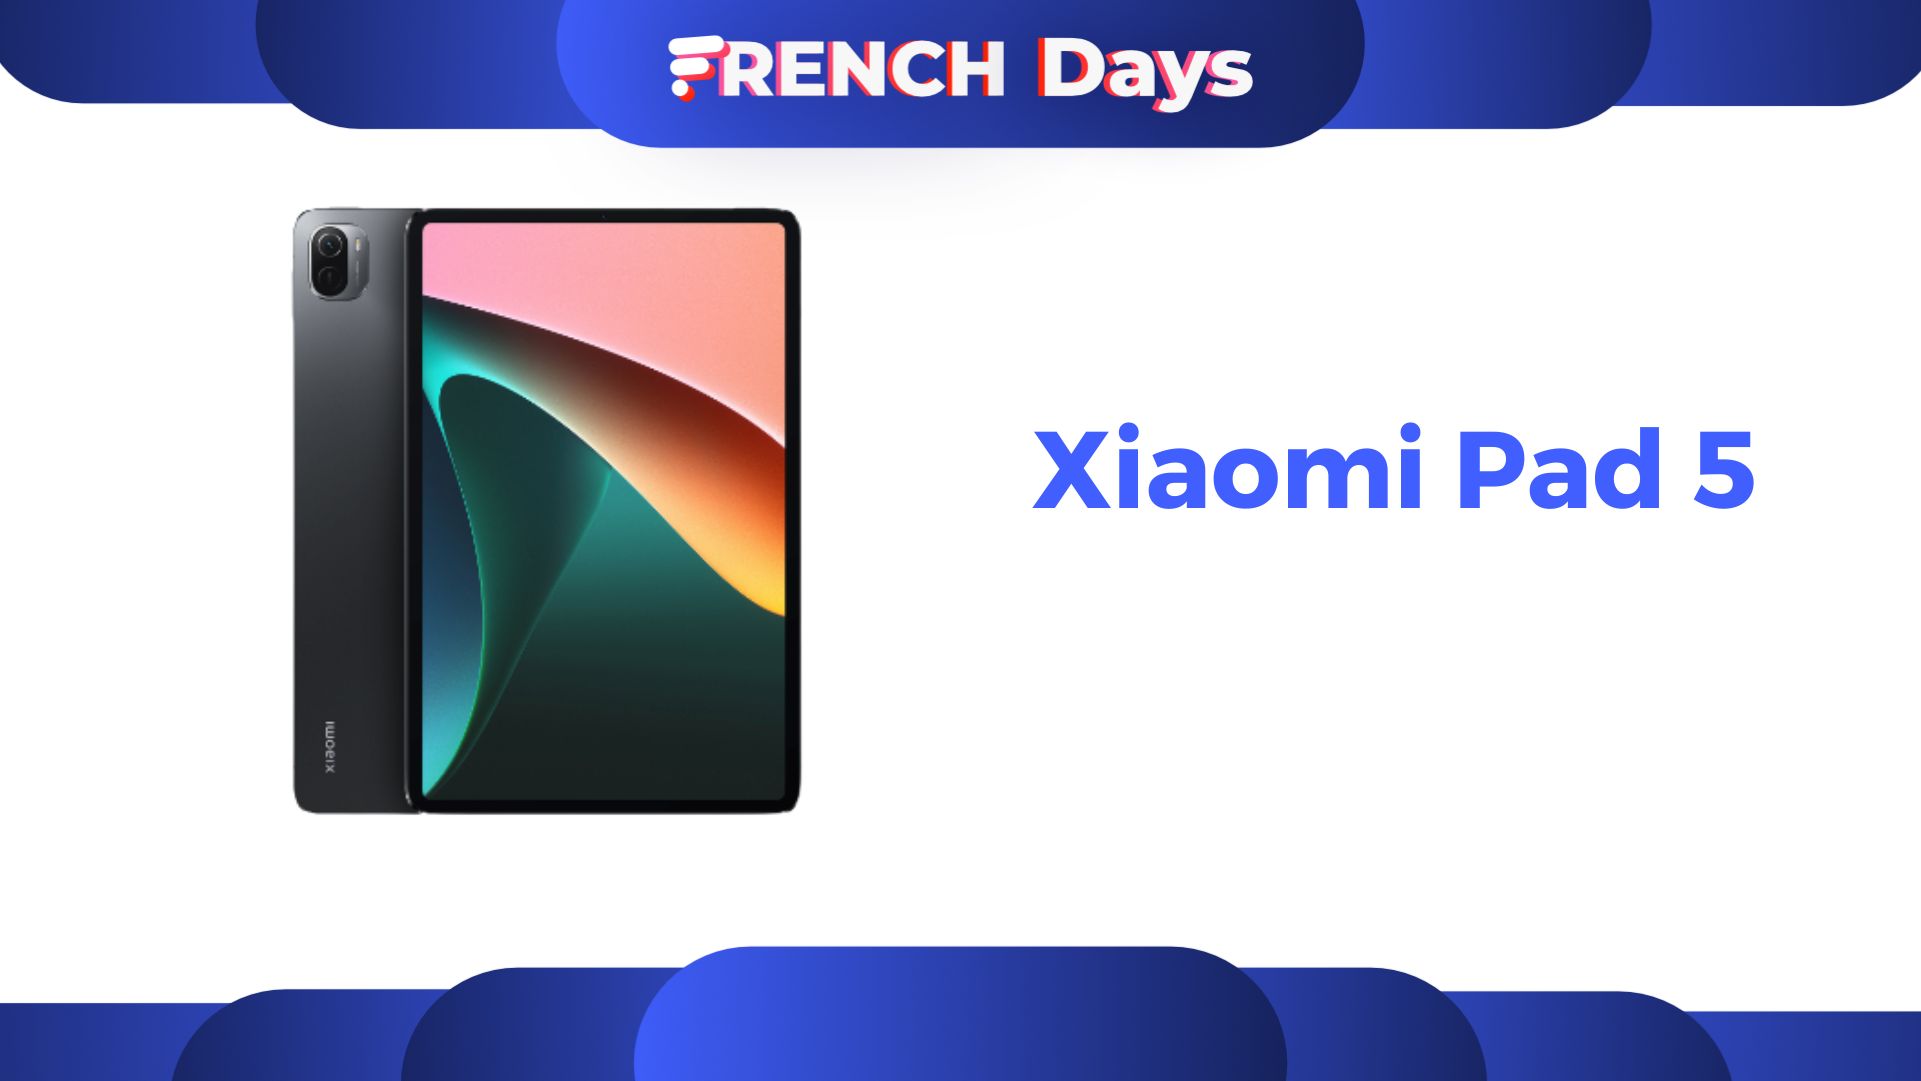 The Xiaomi Pad 5 does not resist the French Days, and loses more than 115 € of its price